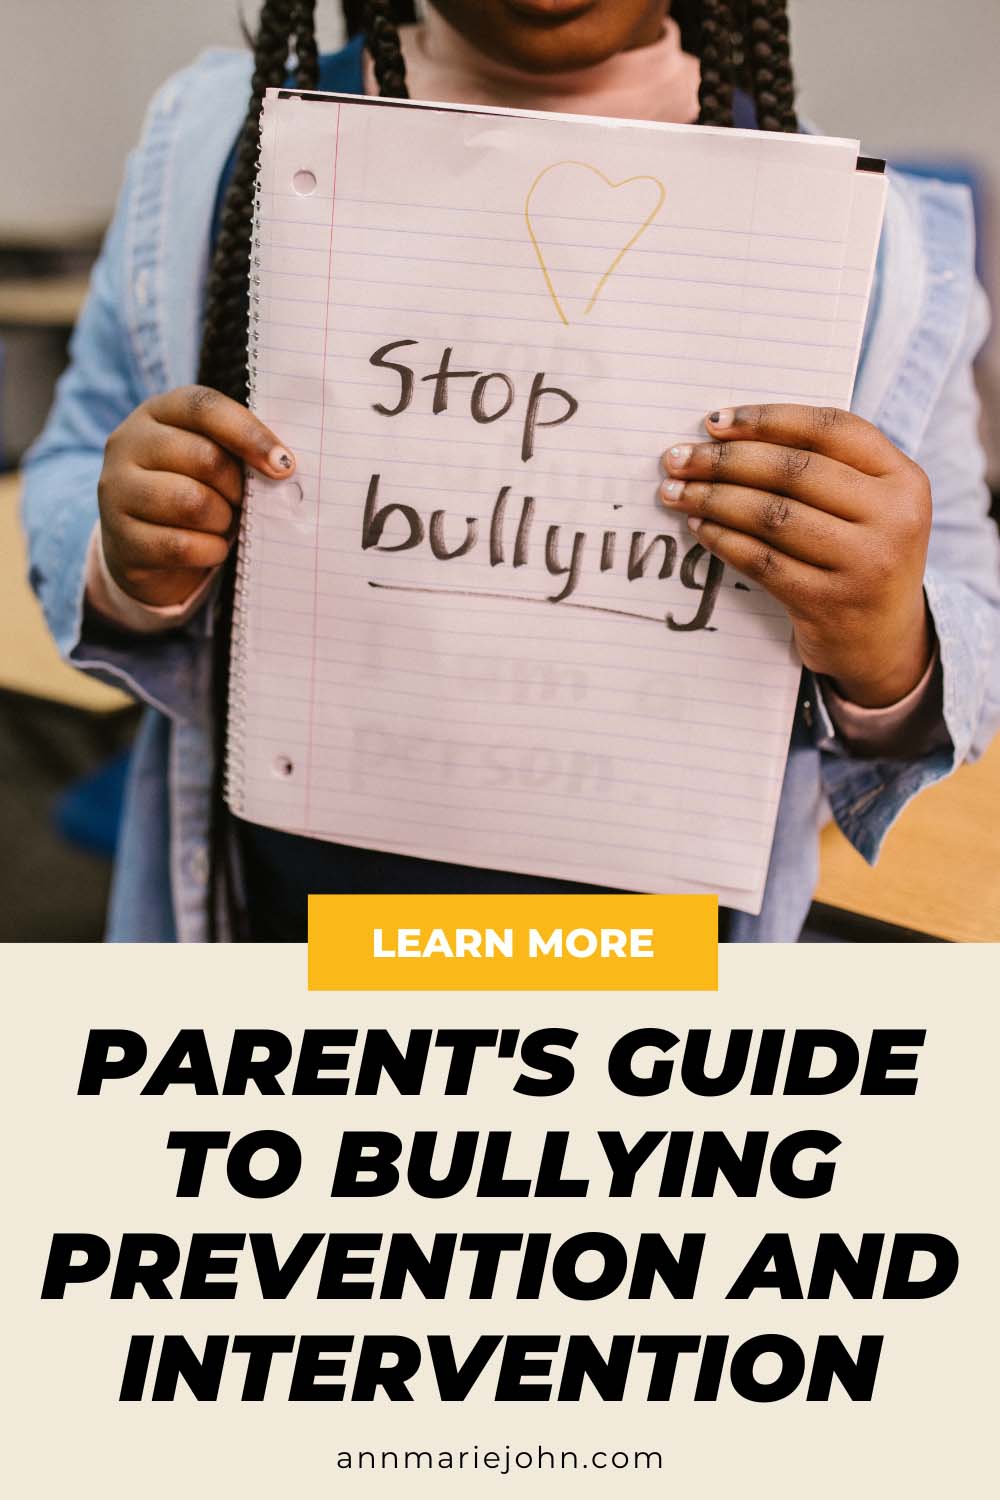 Parent's Guide to Bullying Prevention and Intervention